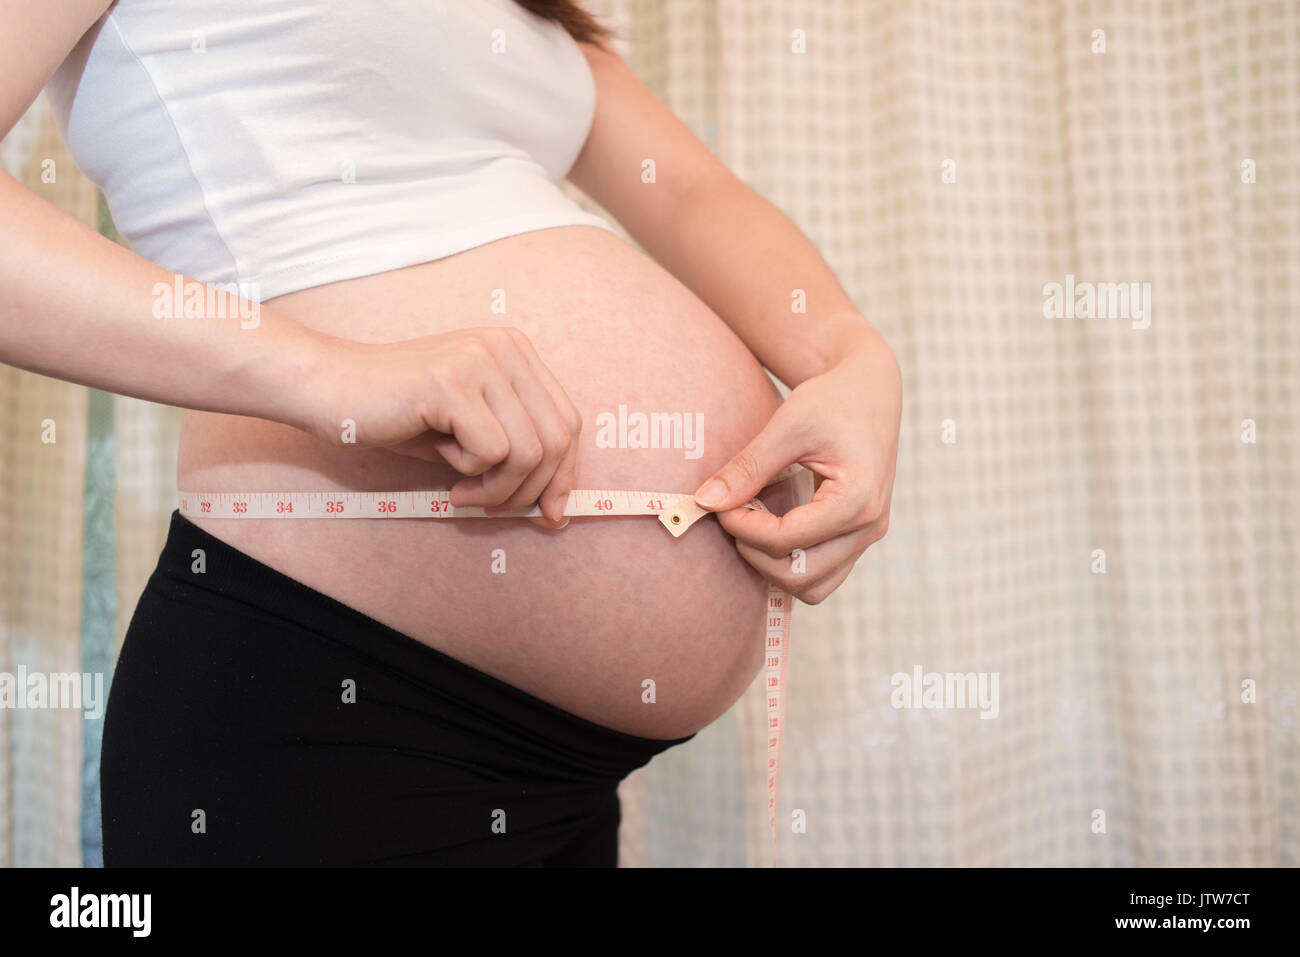 a pregnant woman measure Belly, baby coming soon on the world Stock Photo